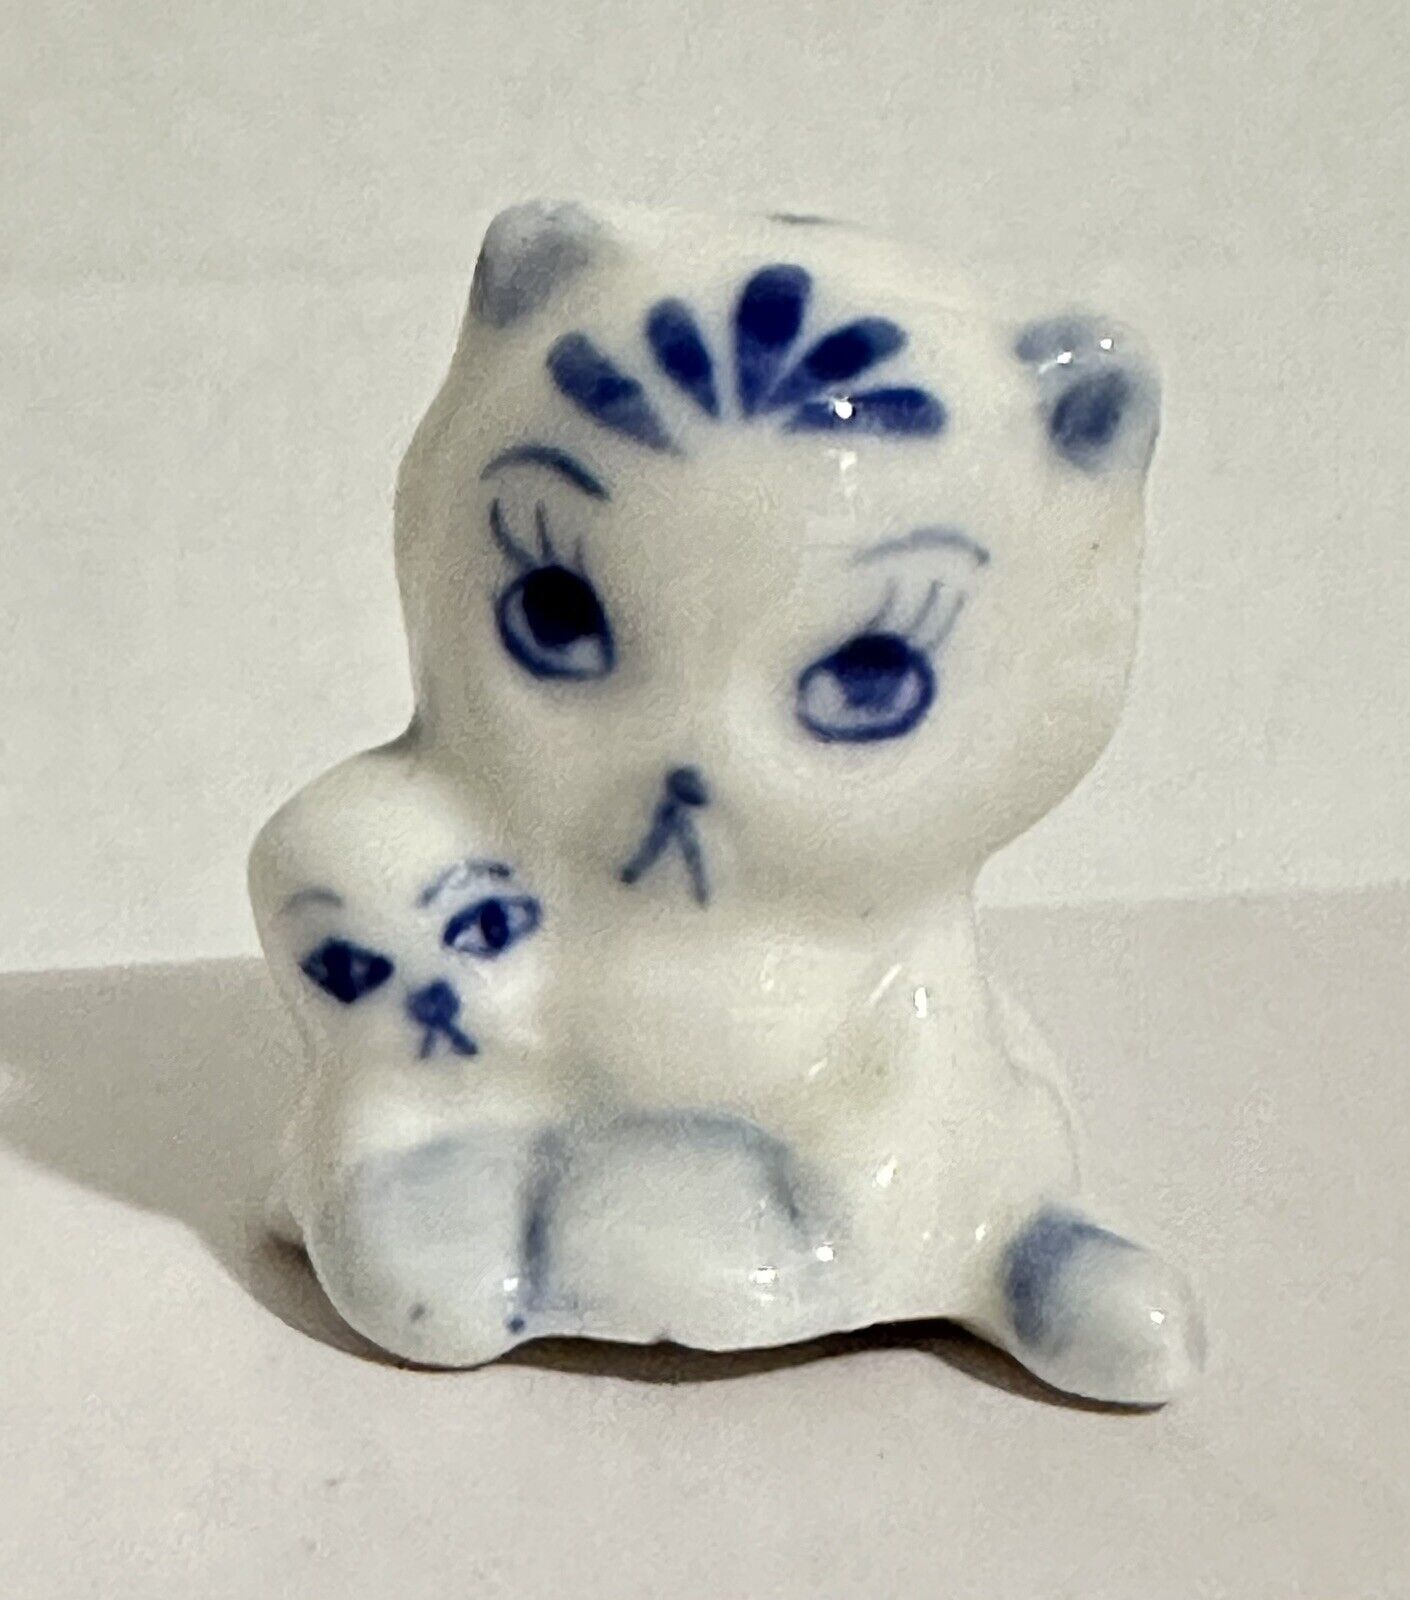 Vintage Enesco Miniature Cat with Kitten Figurine Blue and White Delft Porcelain